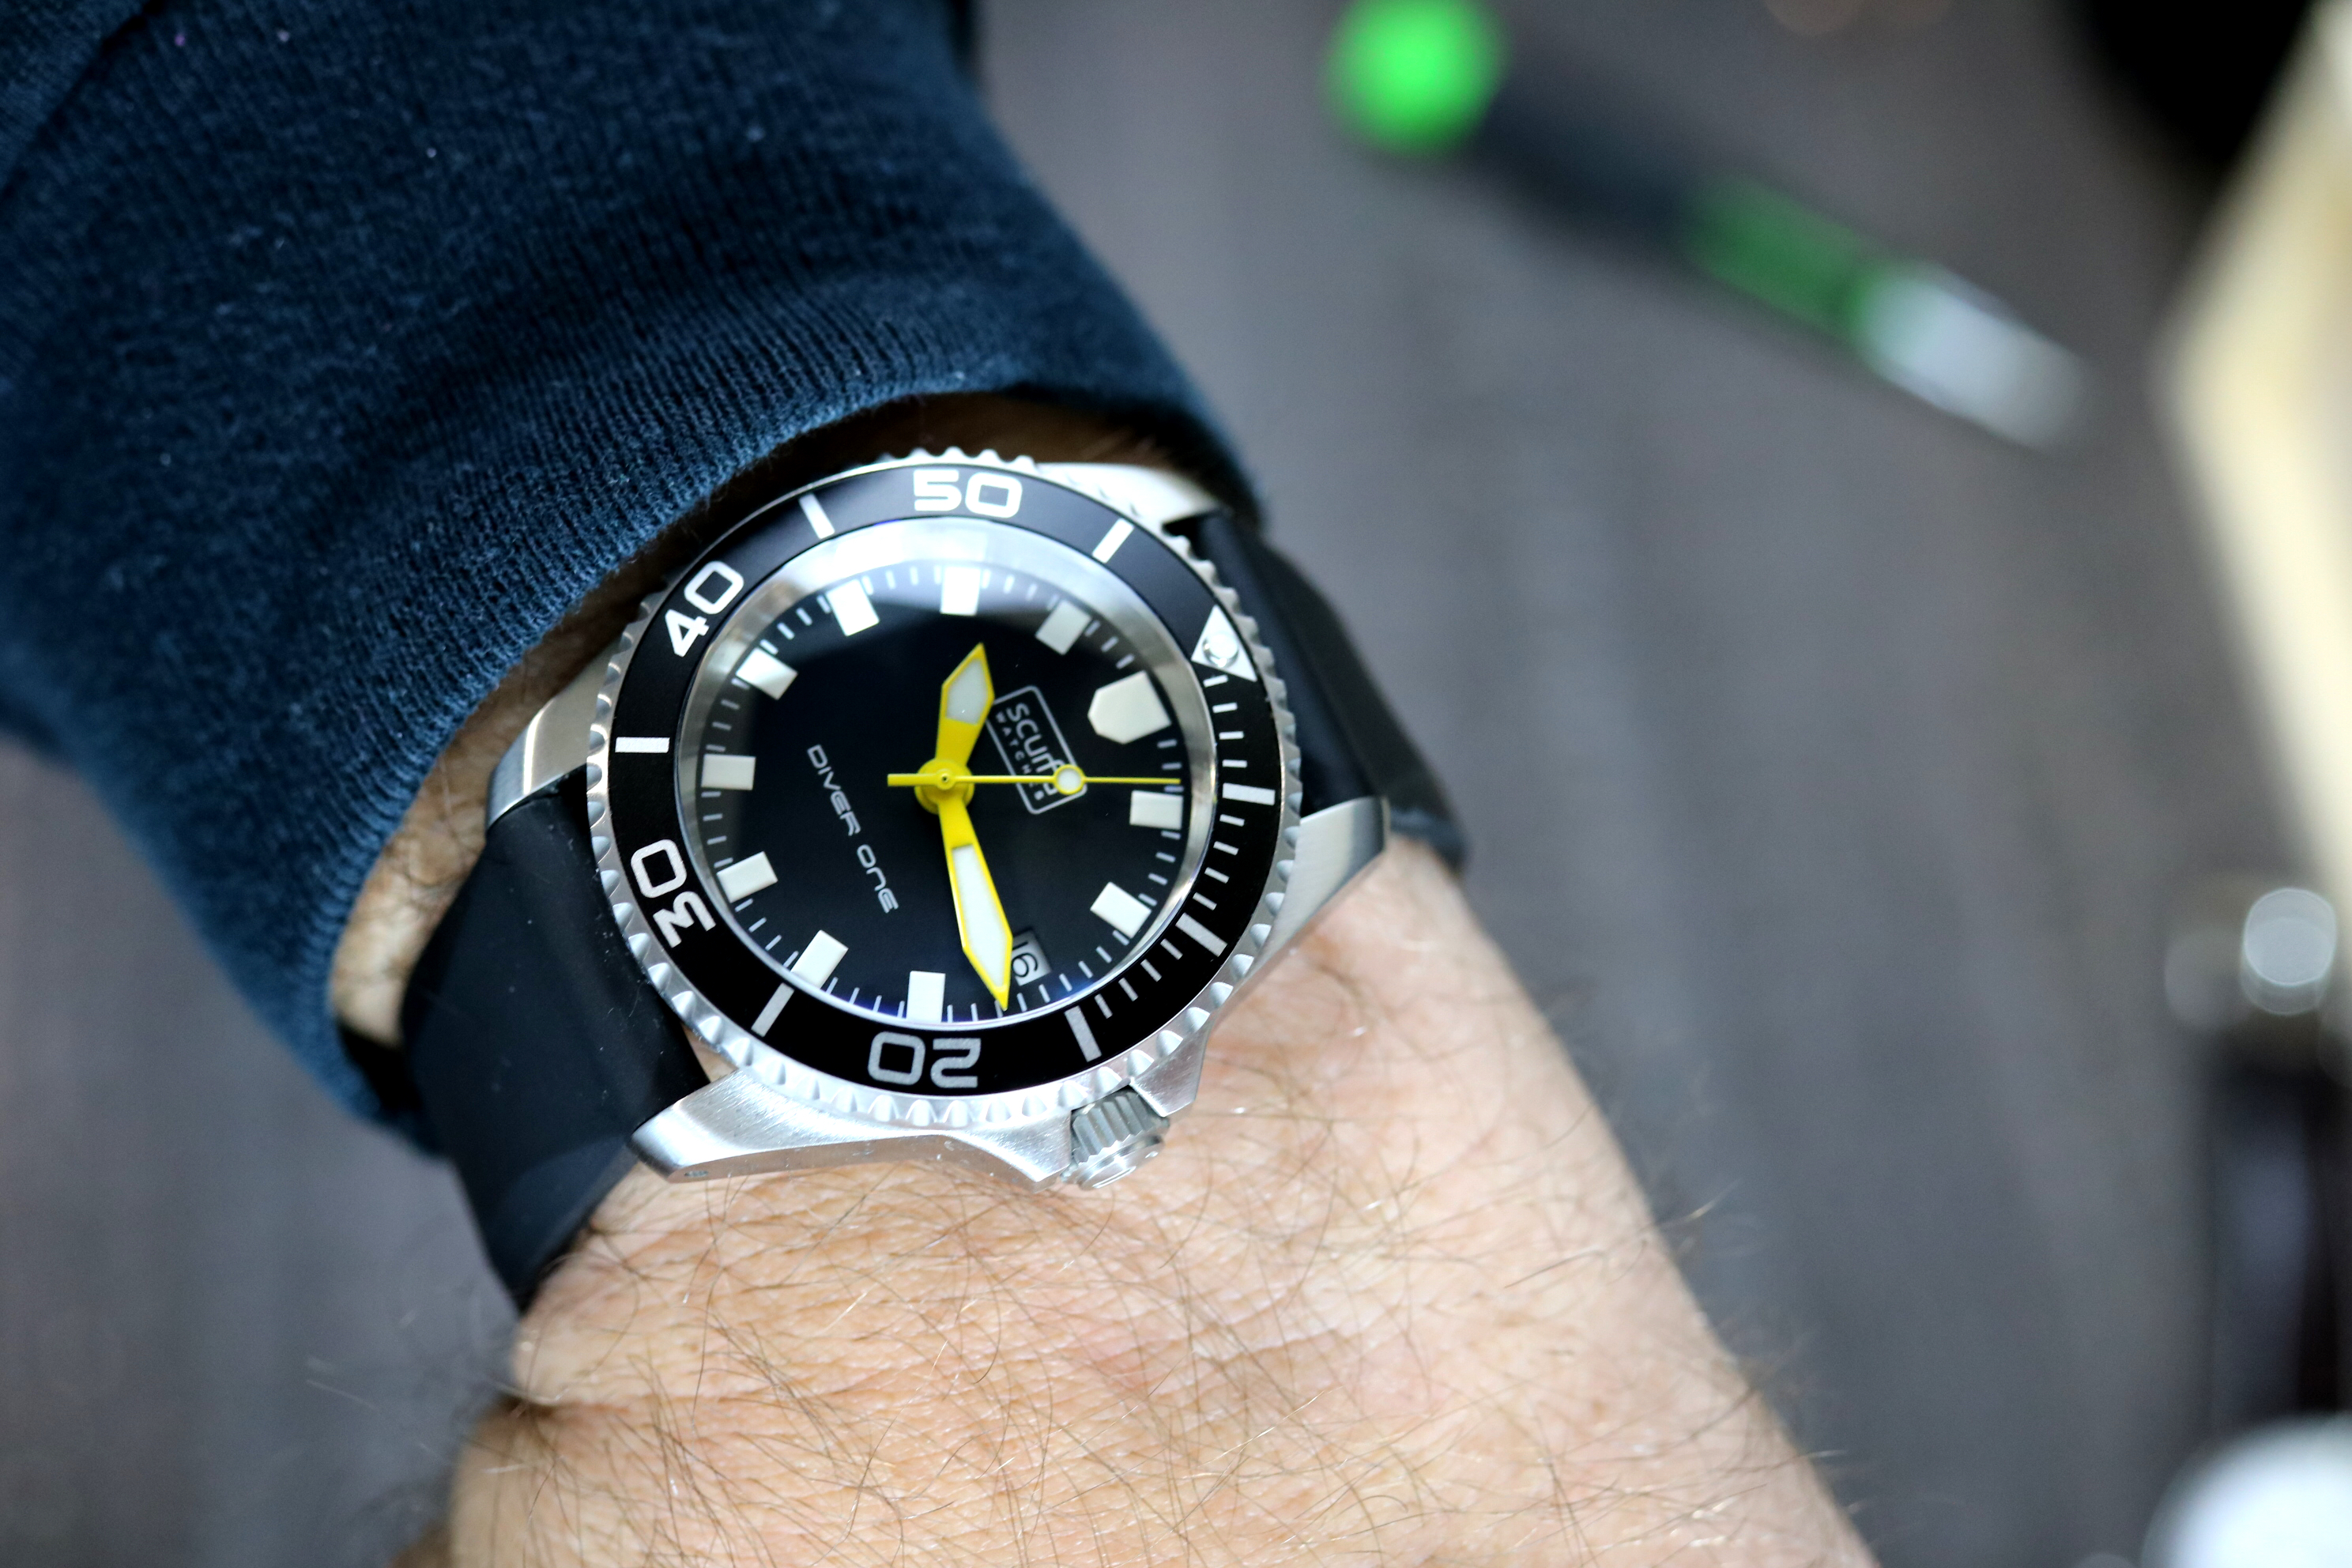 Scurfa Diver One 2.0